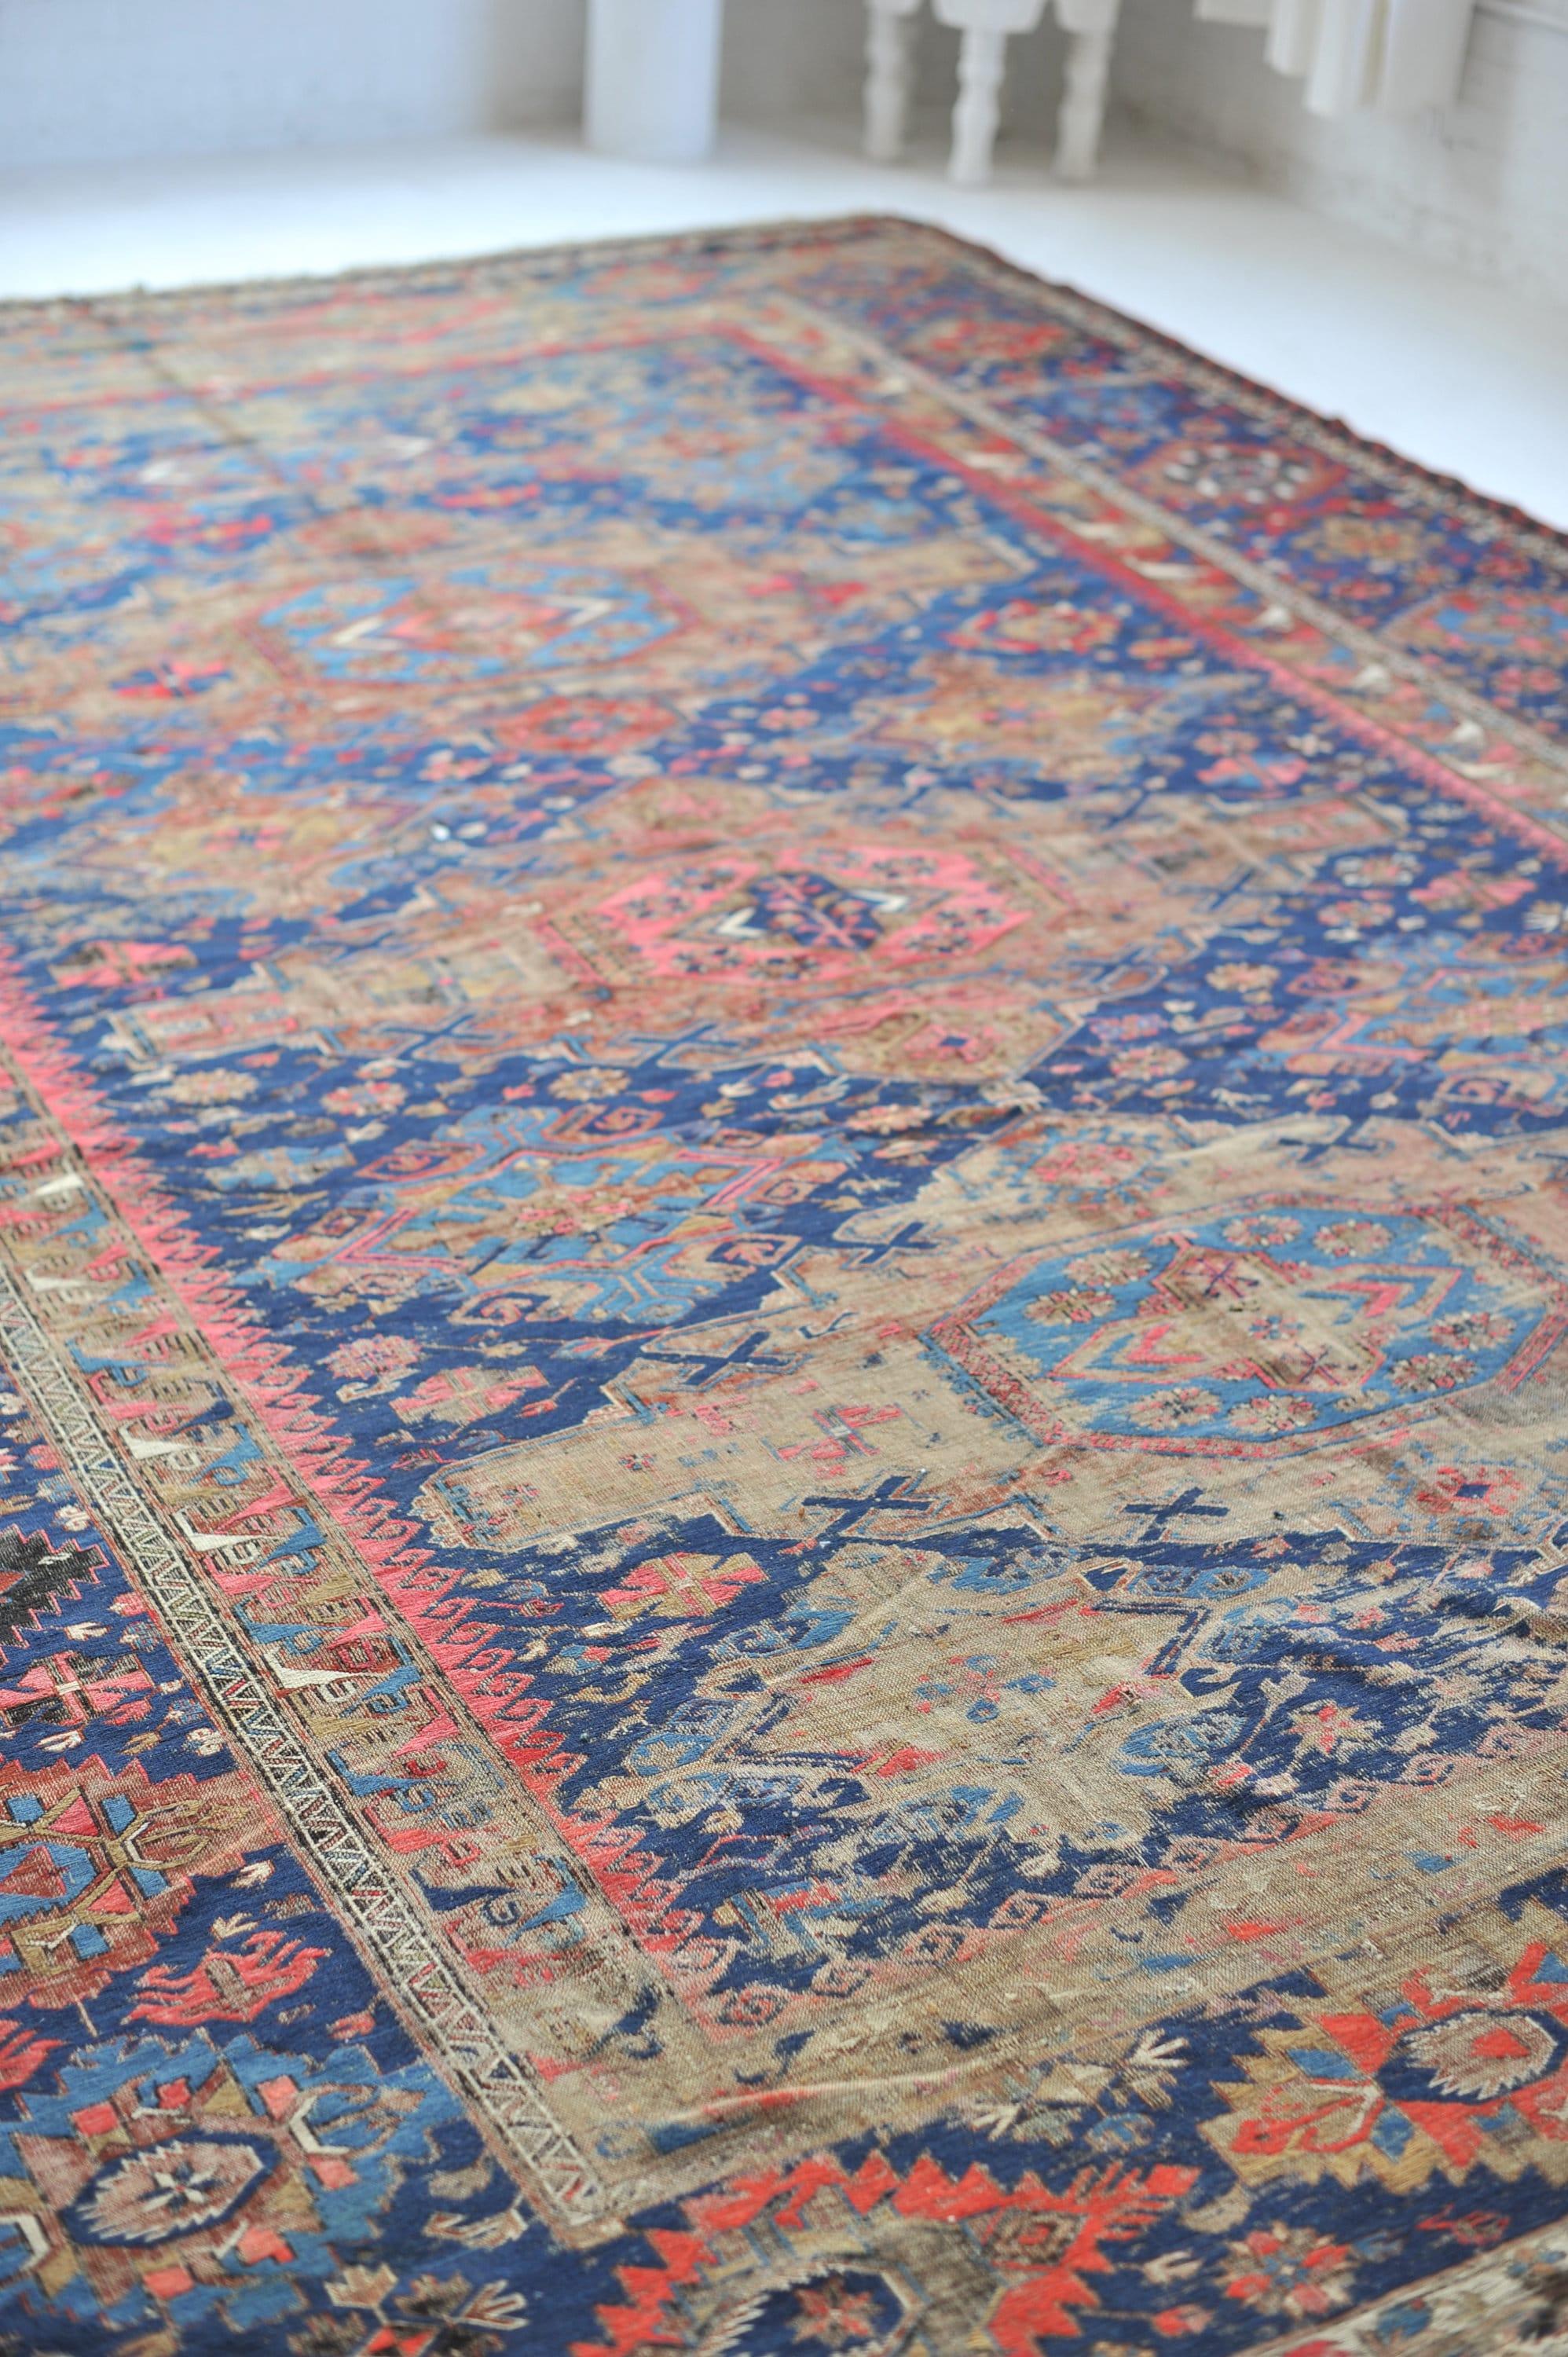 One-of-one Over-sized Palatial Antique Sumac Textile Rug, c.1910 For Sale 2